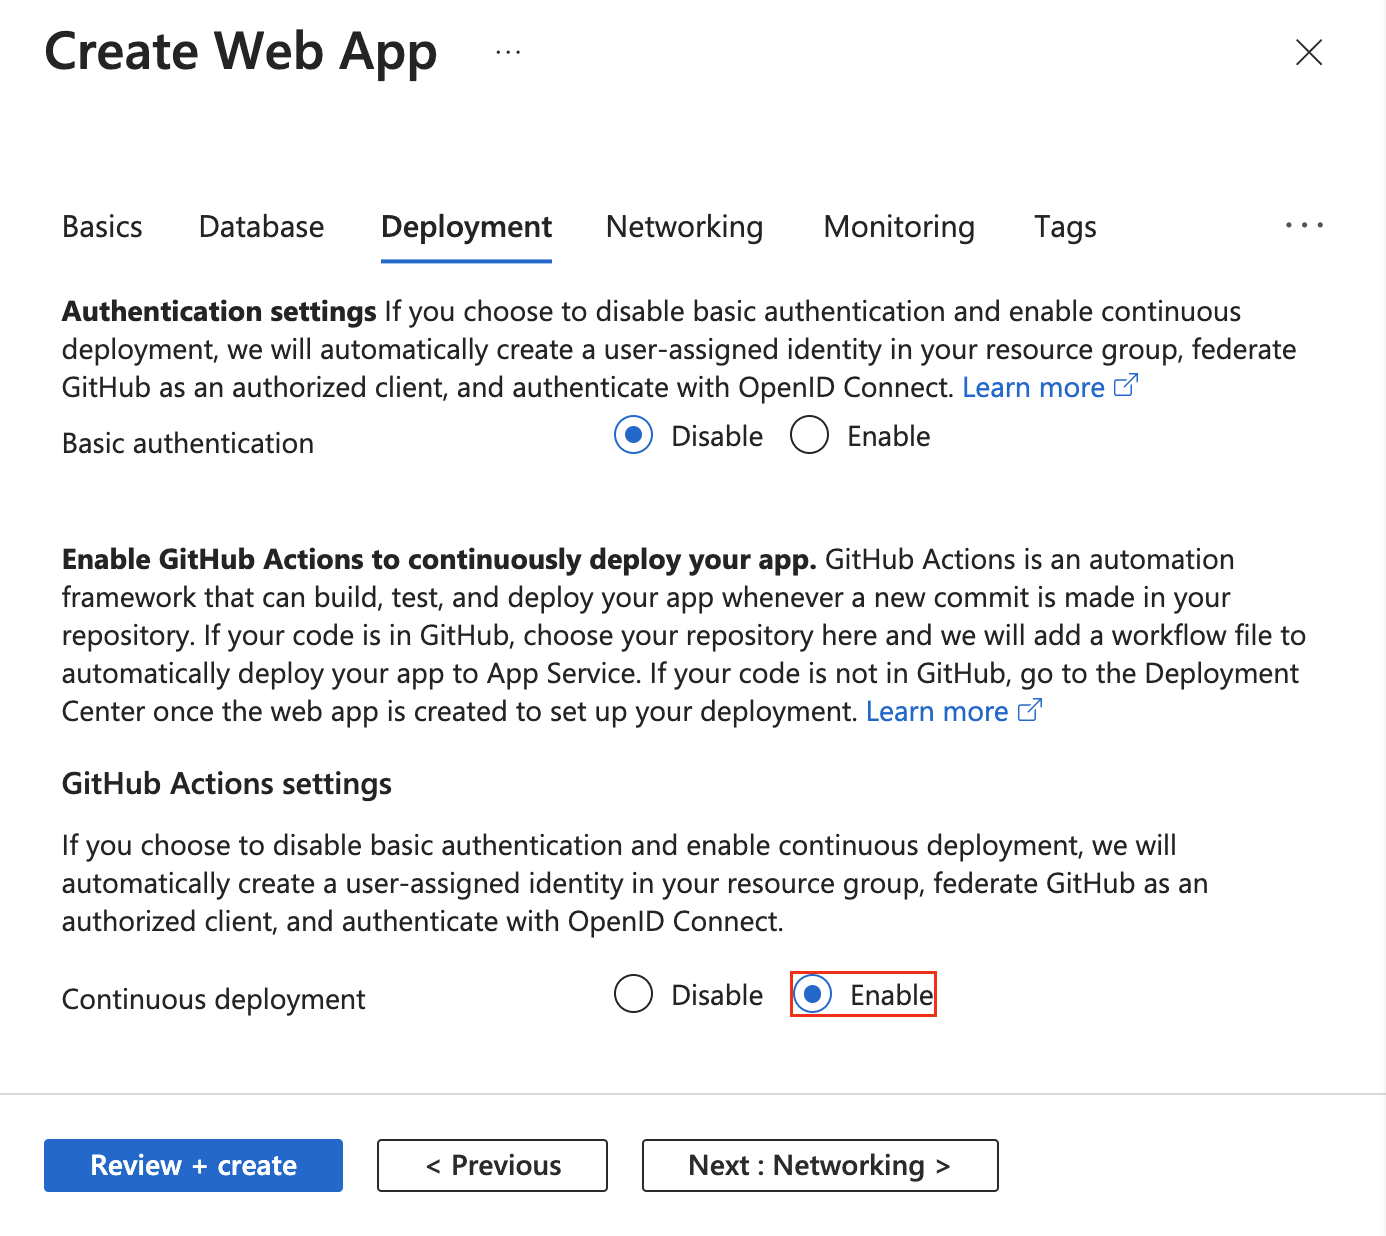 A screenshot showing how to enable GitHub Actions deployment in the App Service create wizard.